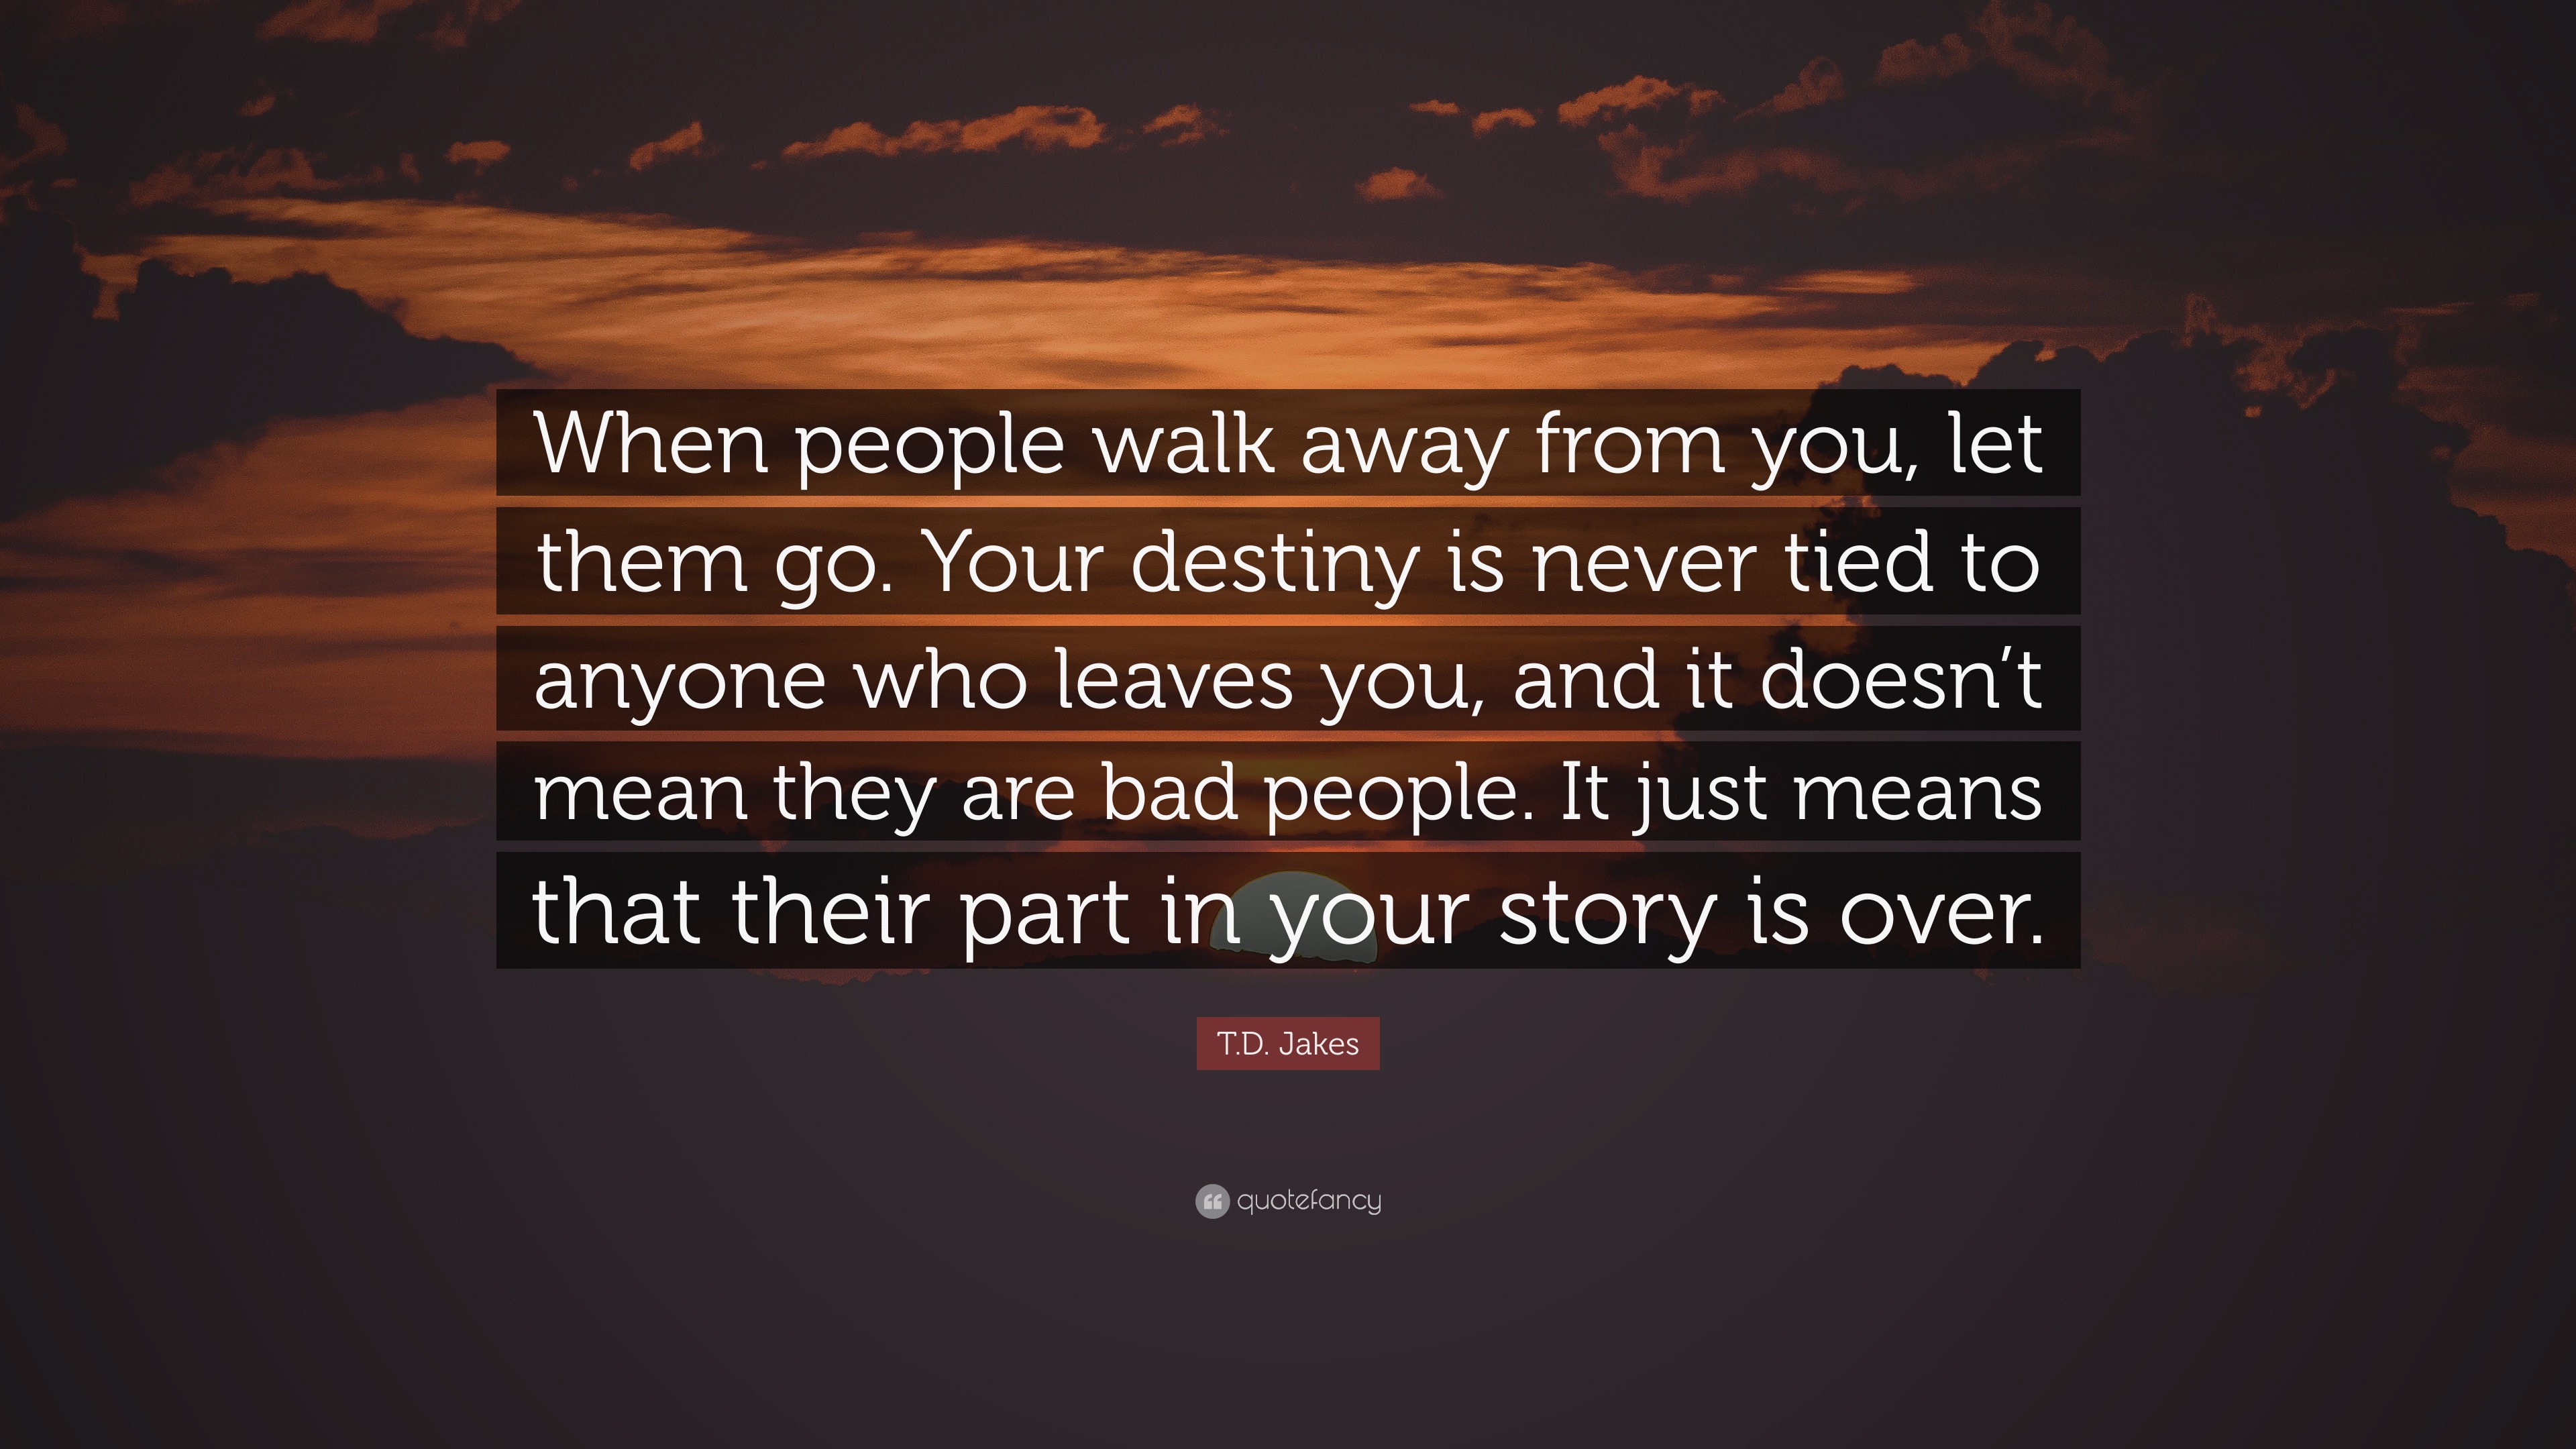 When people walk away from you, let them go. 